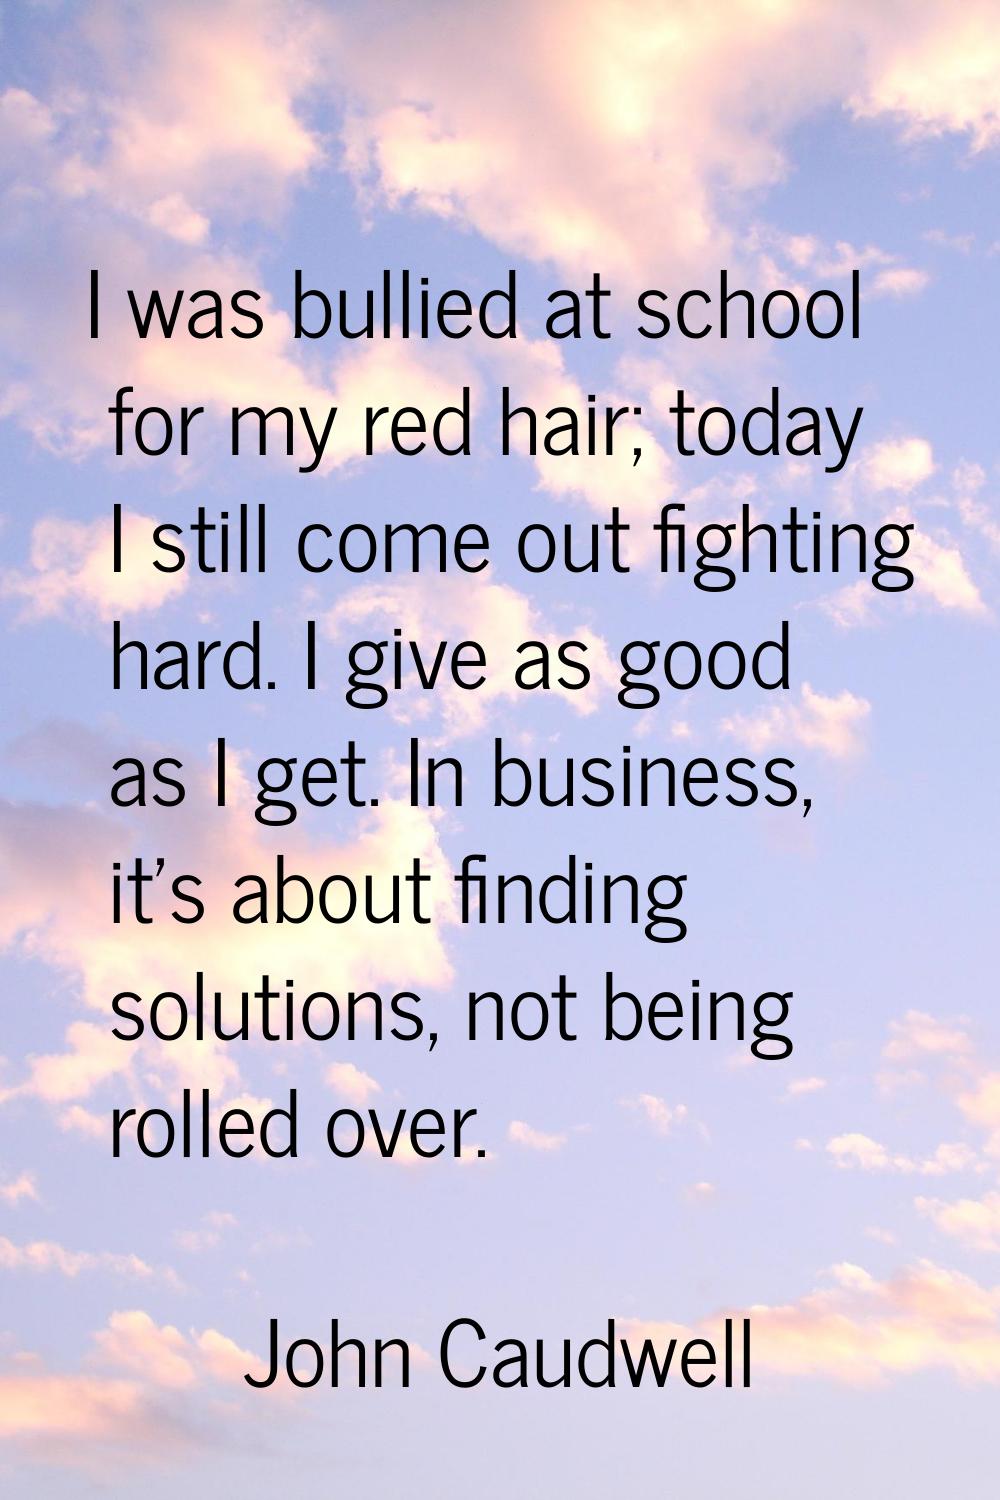 I was bullied at school for my red hair; today I still come out fighting hard. I give as good as I 